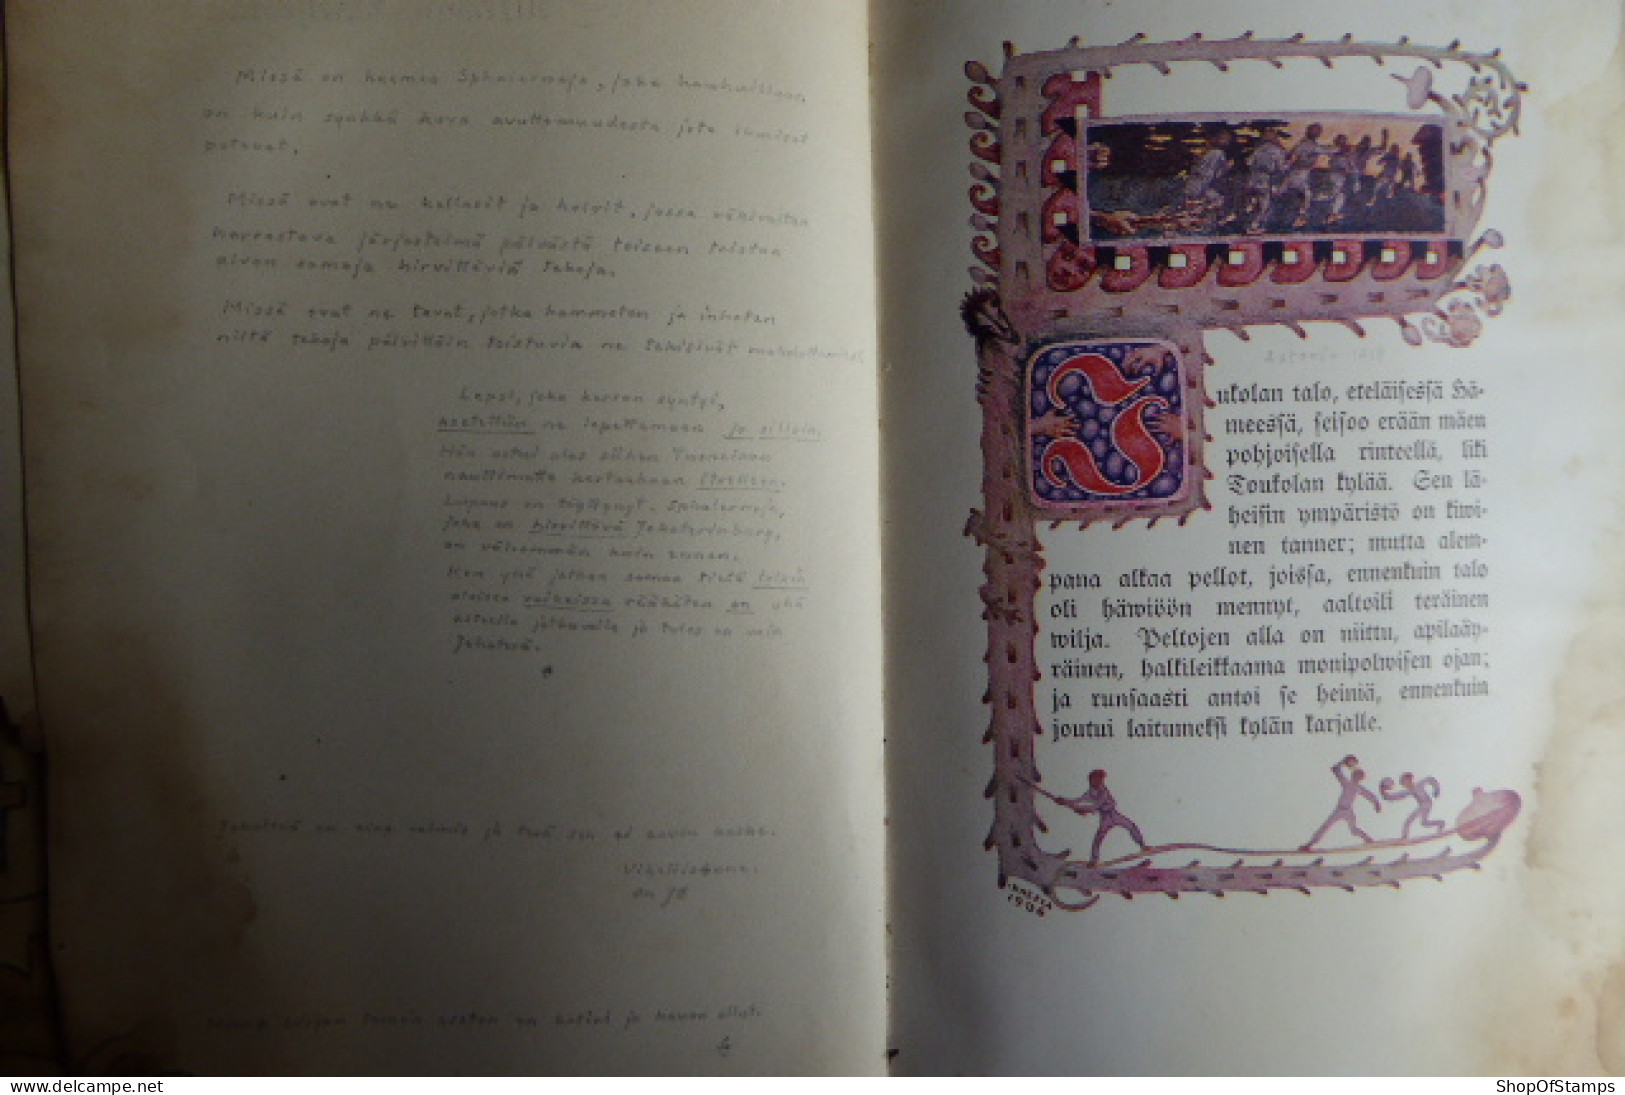 BOOK; SEITFEMAN WELJESTA FEW CORNERS BURNT BUT BOOK & TEXT IS FINE 1929 600 Pages Notes By Reader - Lingue Scandinave